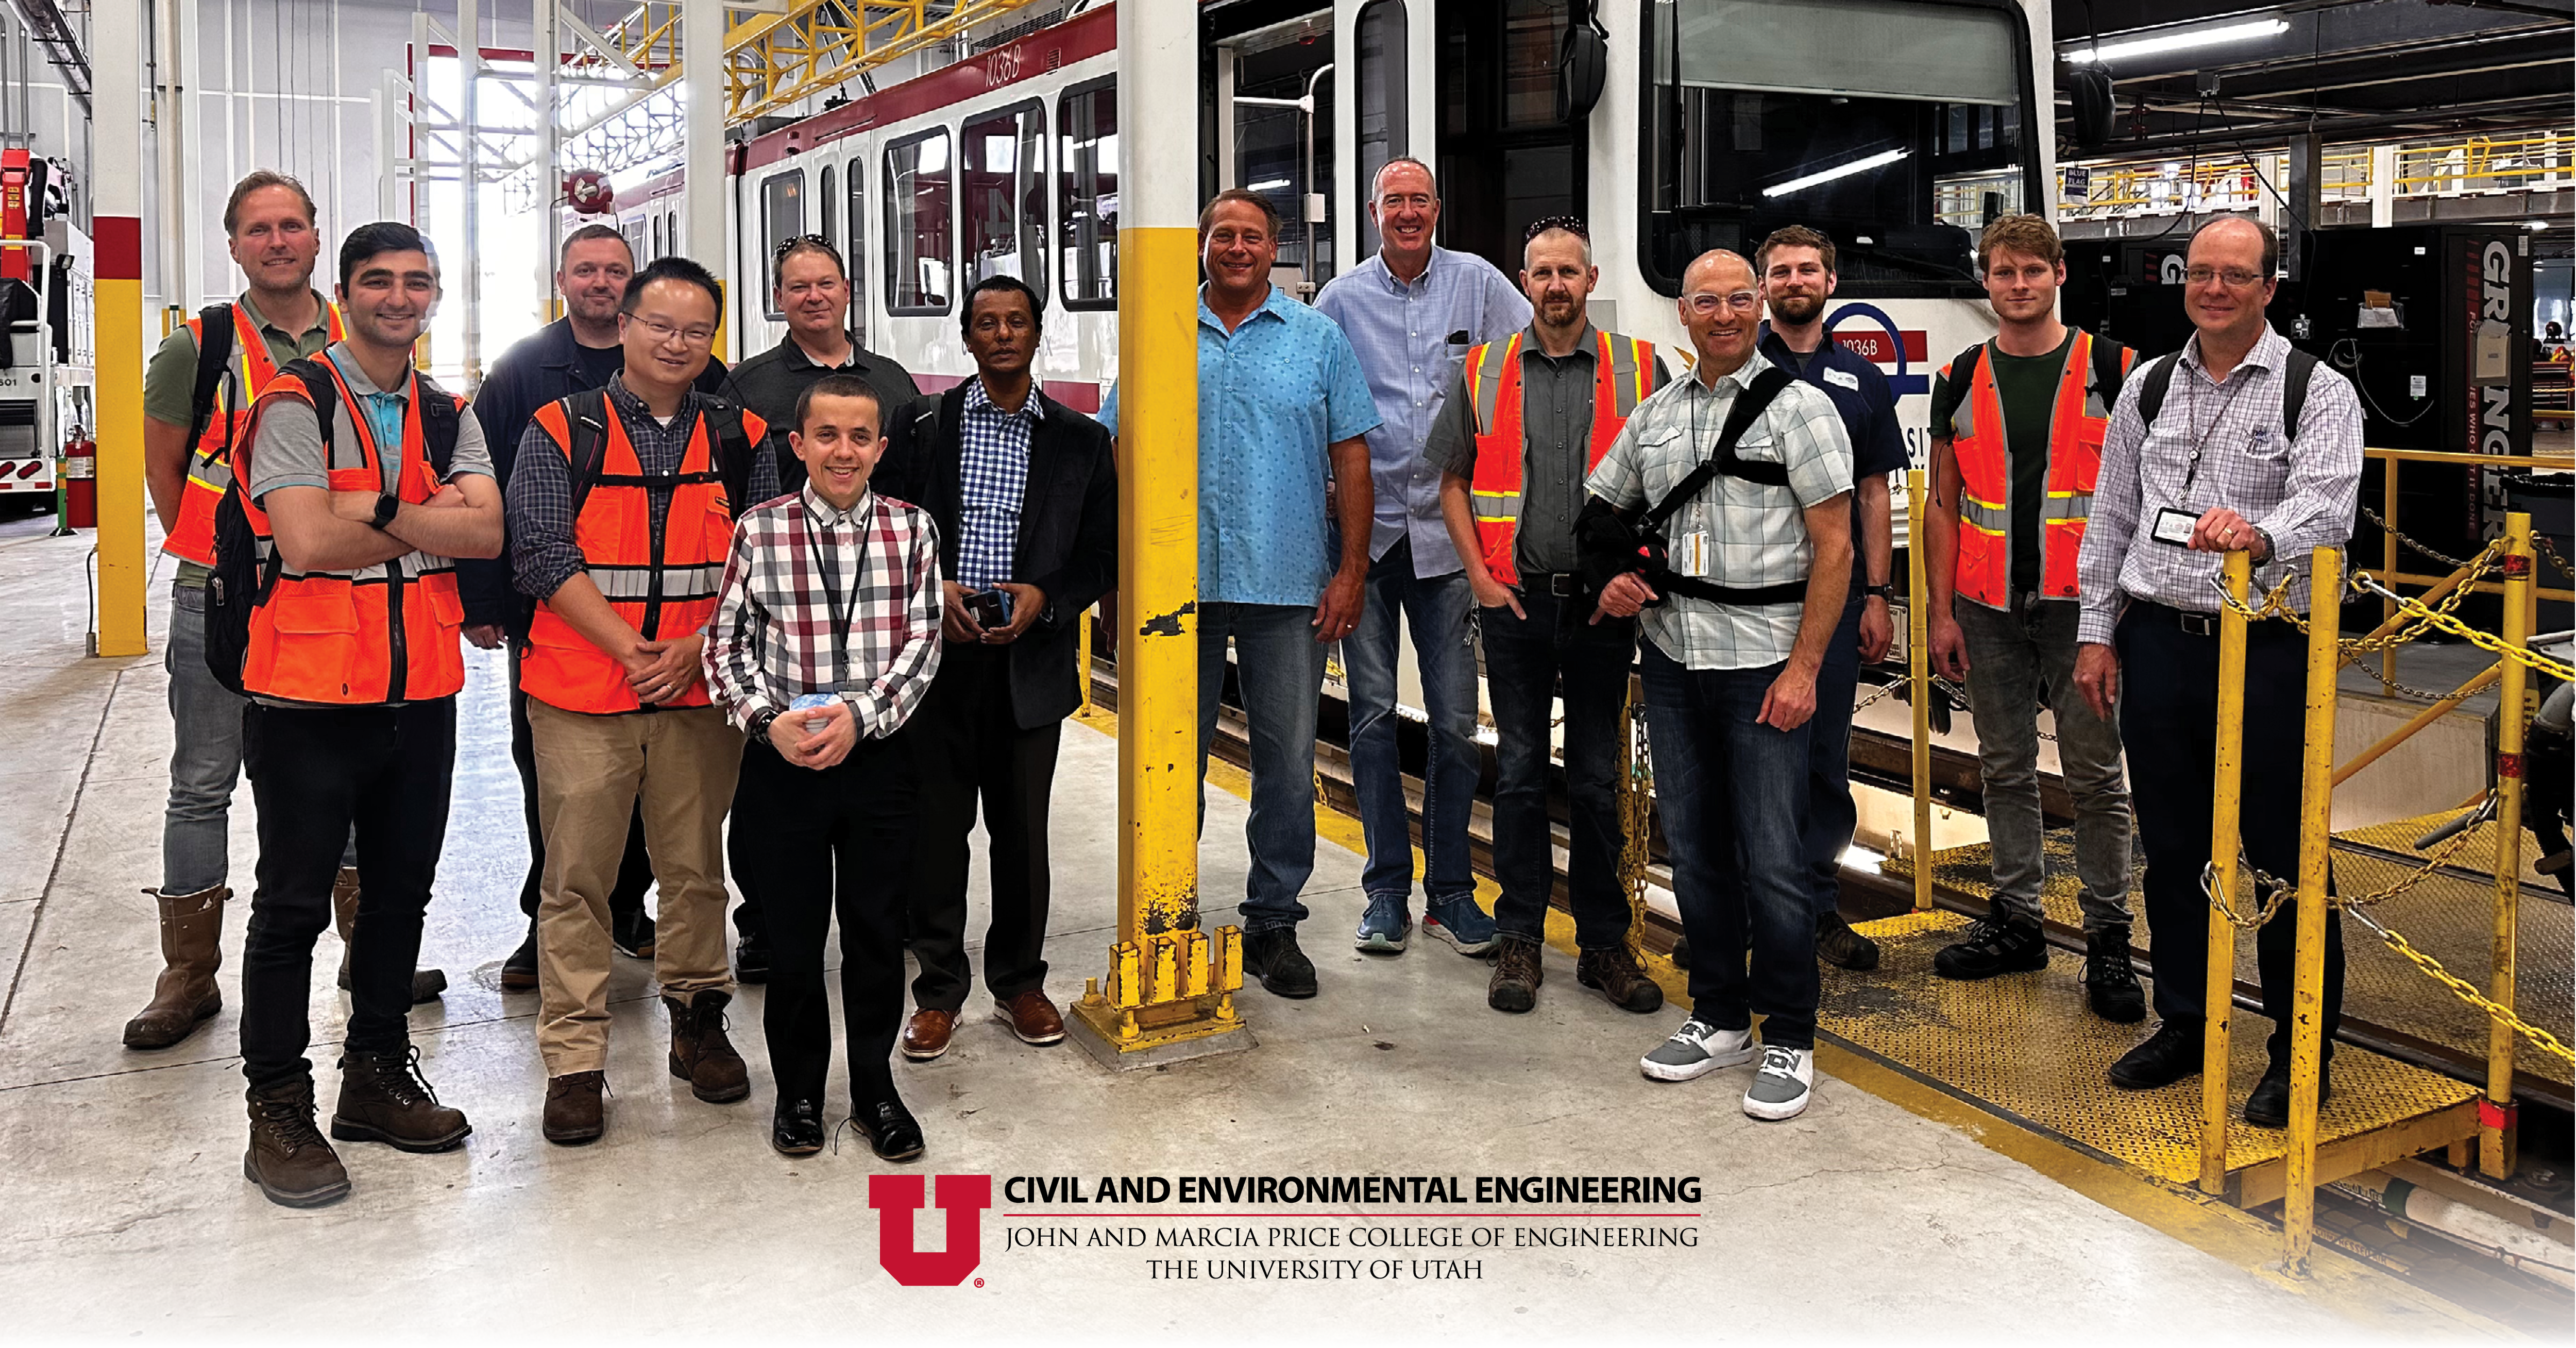 Two Department Grad Students and Professor Zhu Bring Rail and Transit Safety to UTA TRAX